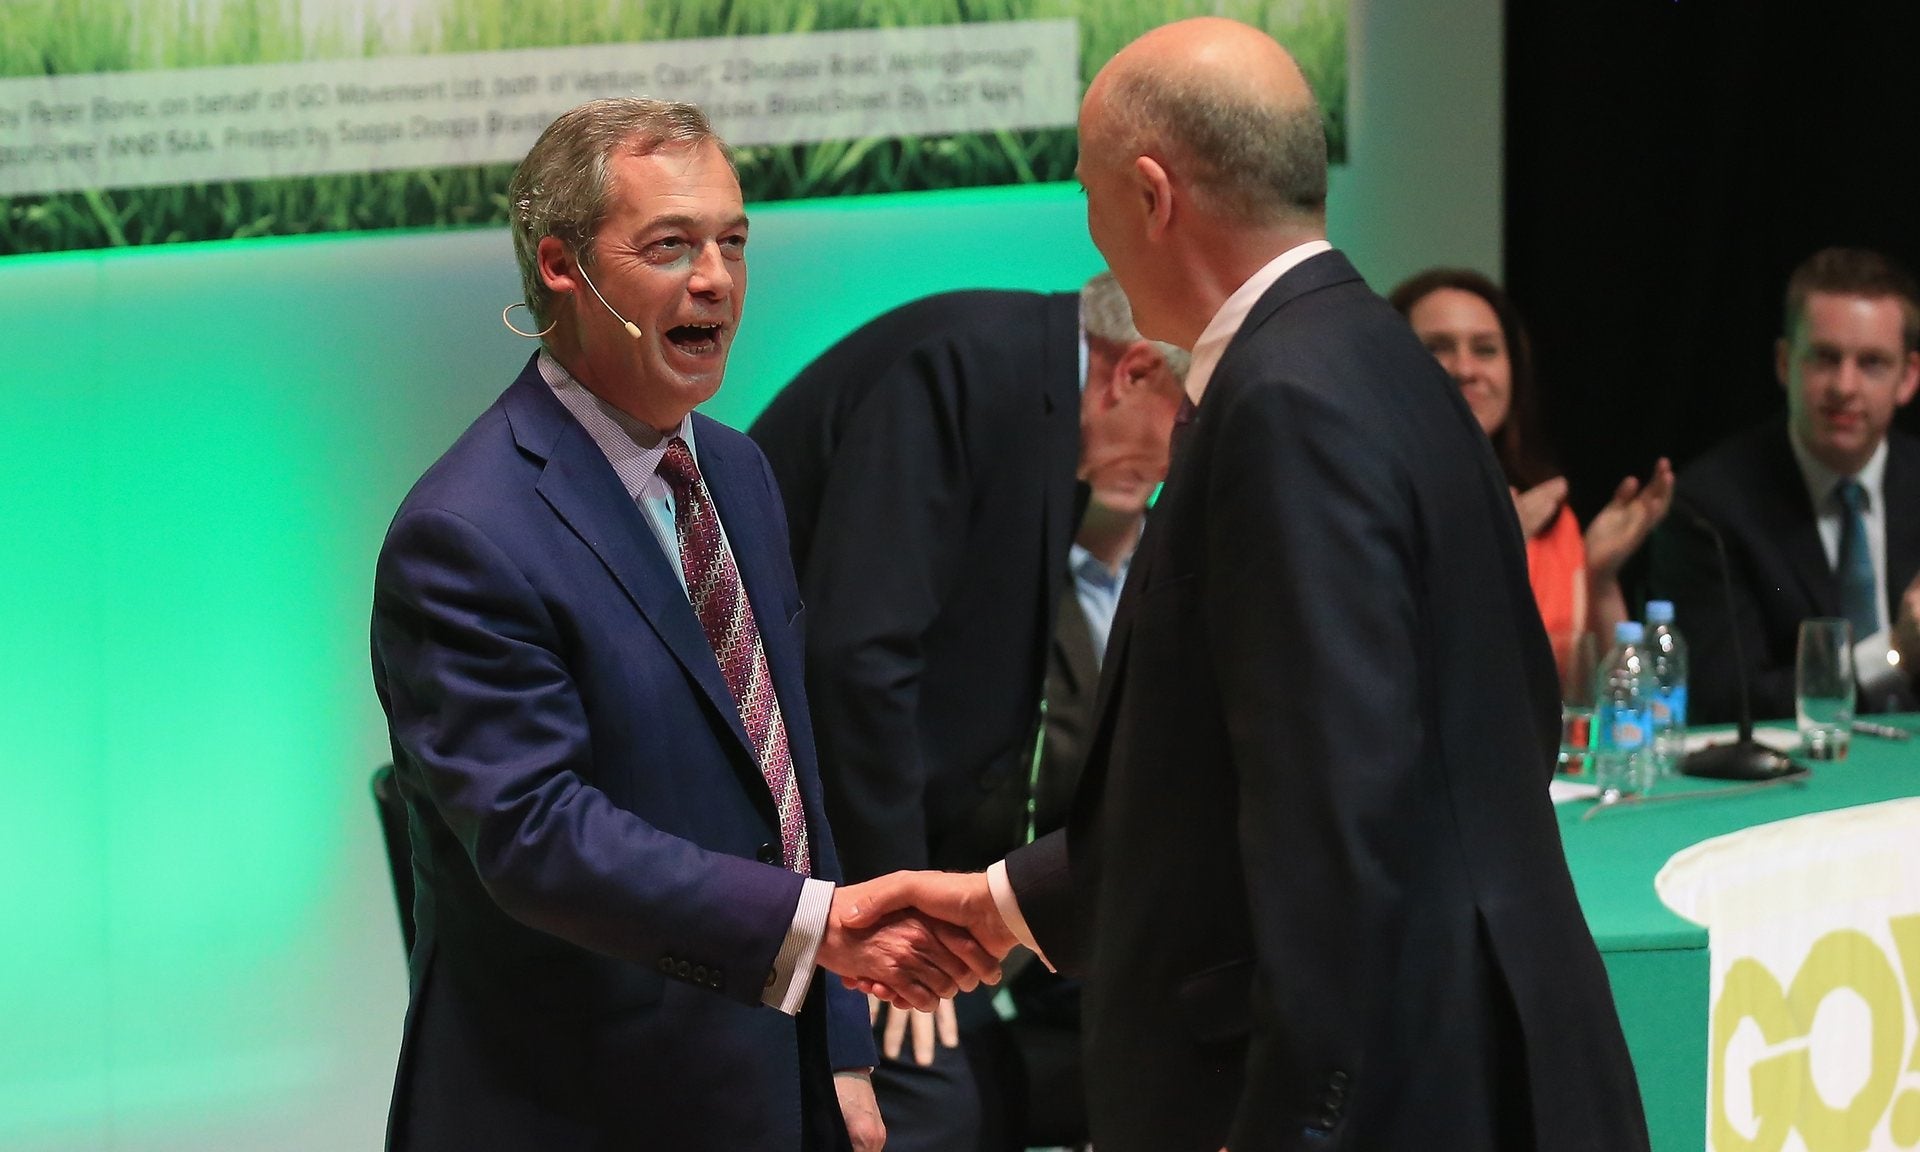 Chris Grayling and Nigel Farage shake hands on stage at Grassroots Out rally in Stoke.